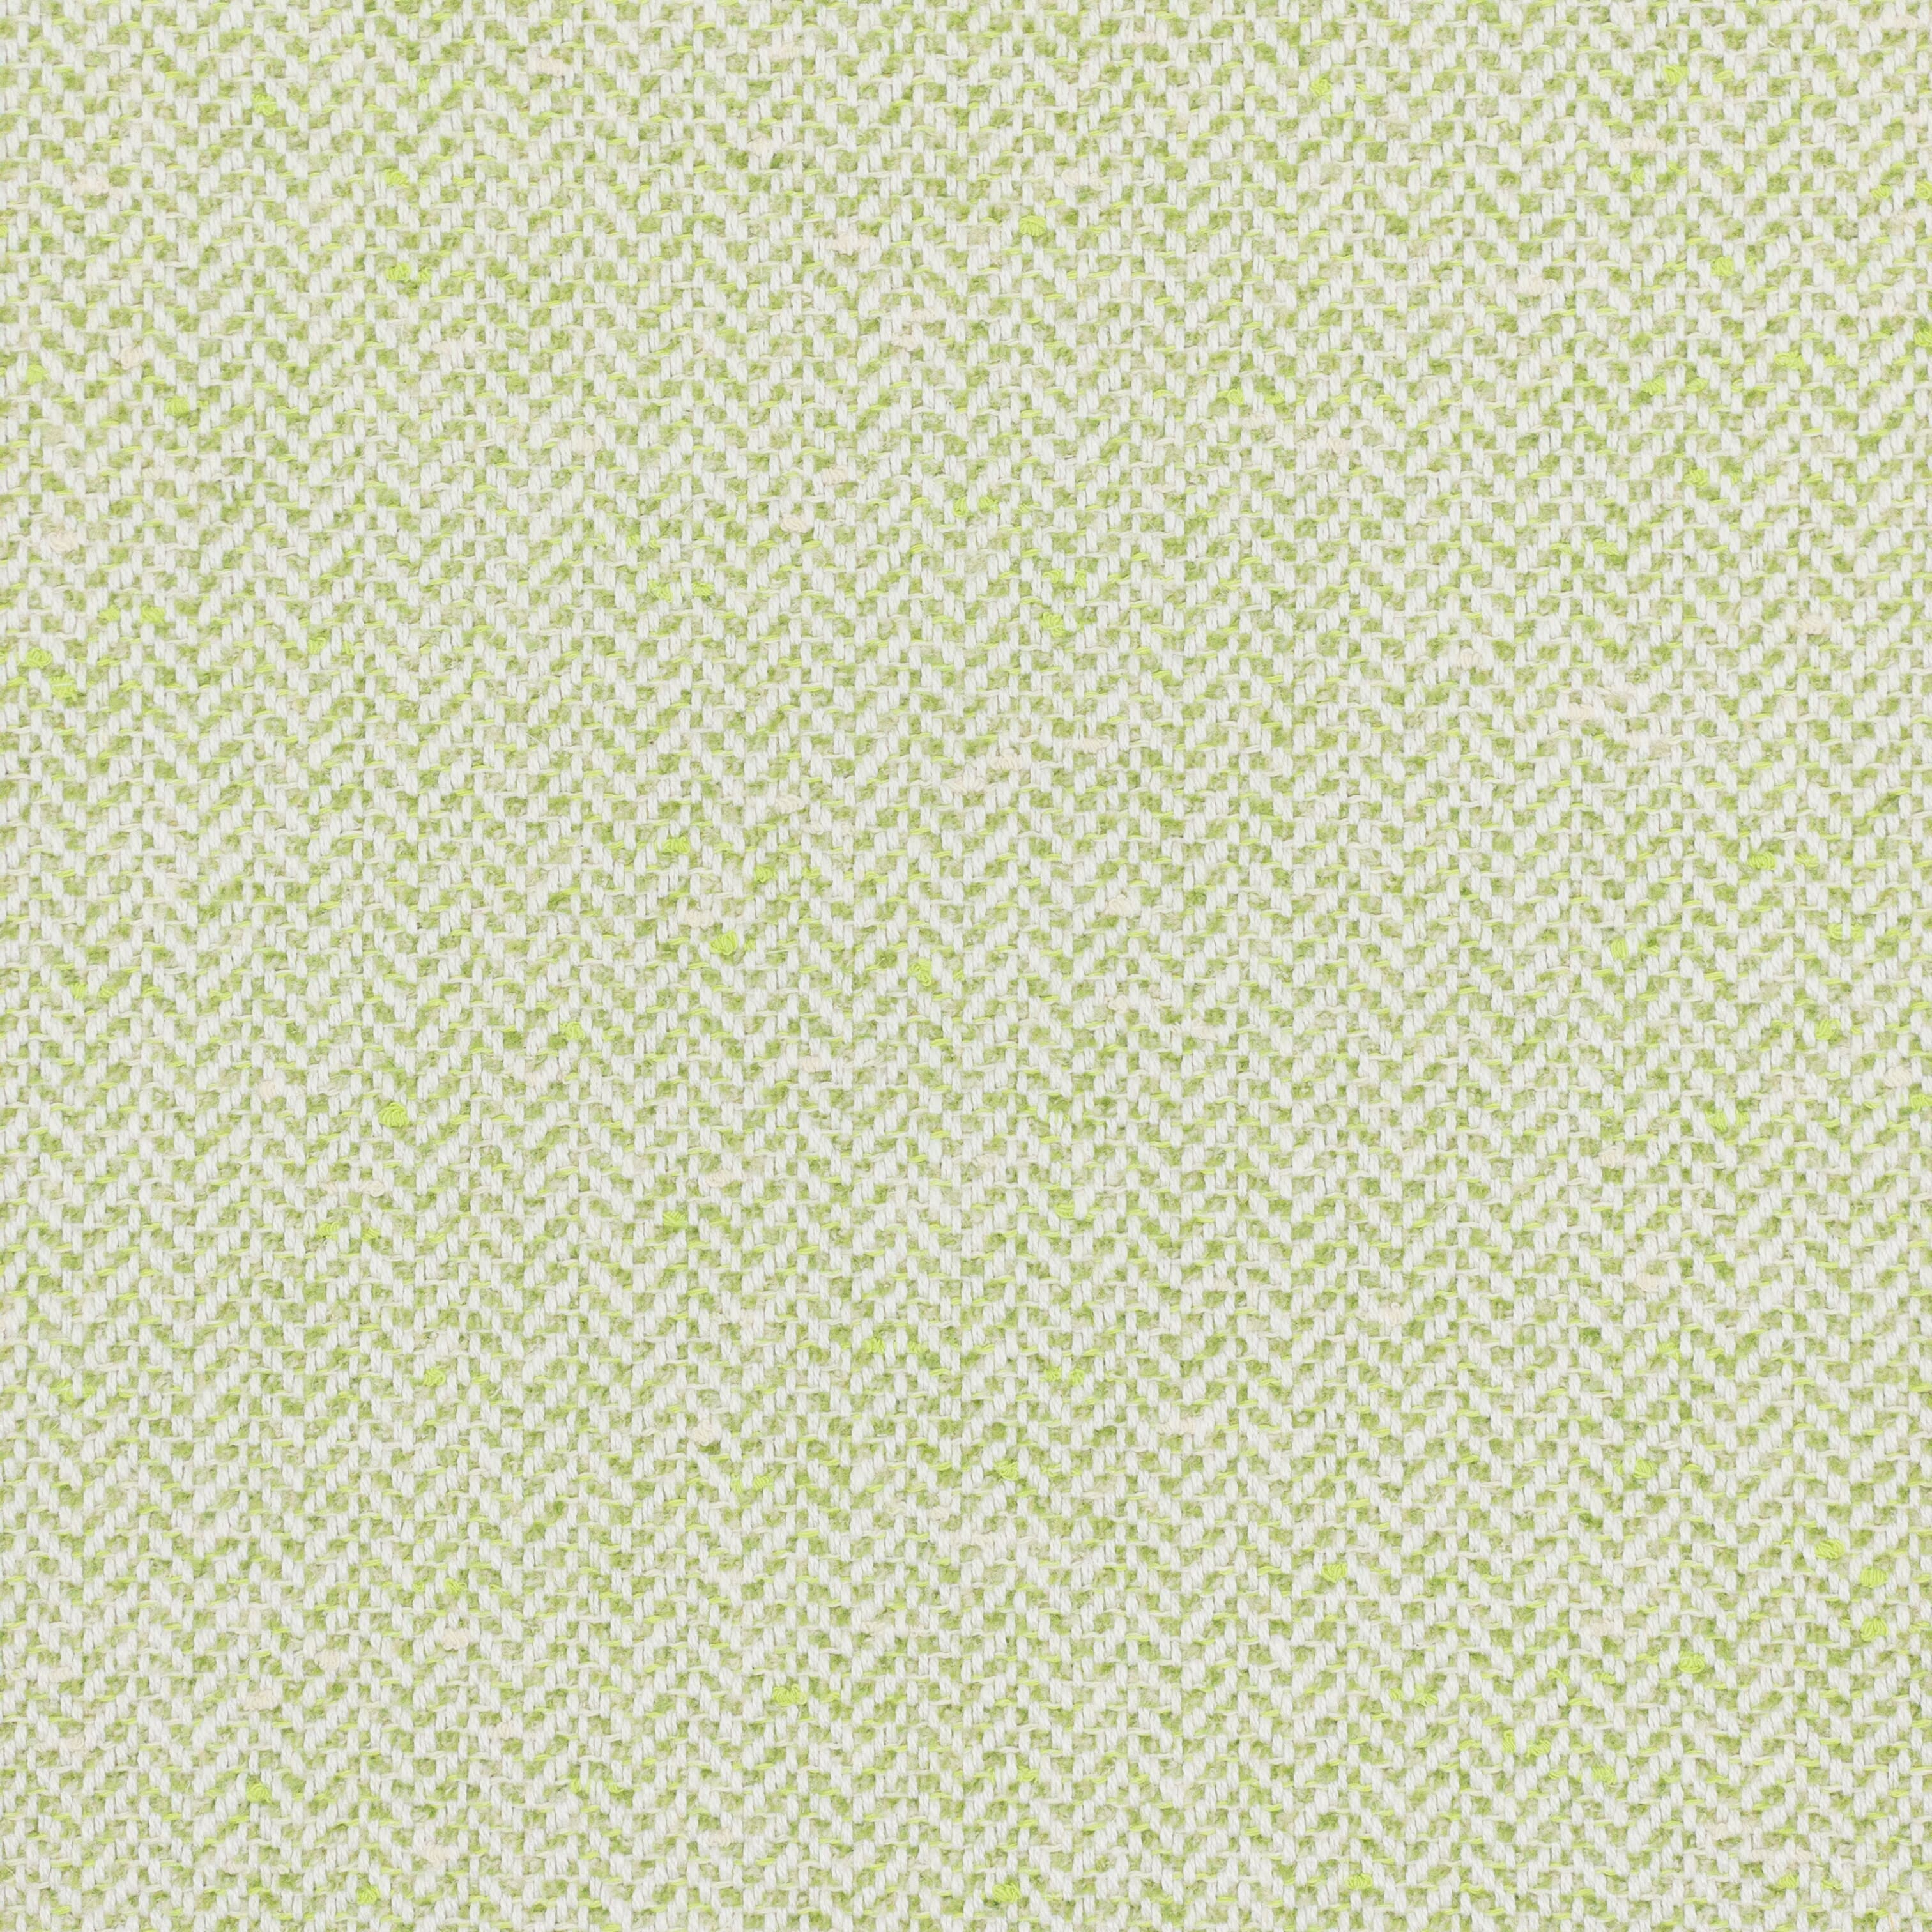 7838-2 Sunnybrook Spring by Stout Fabric